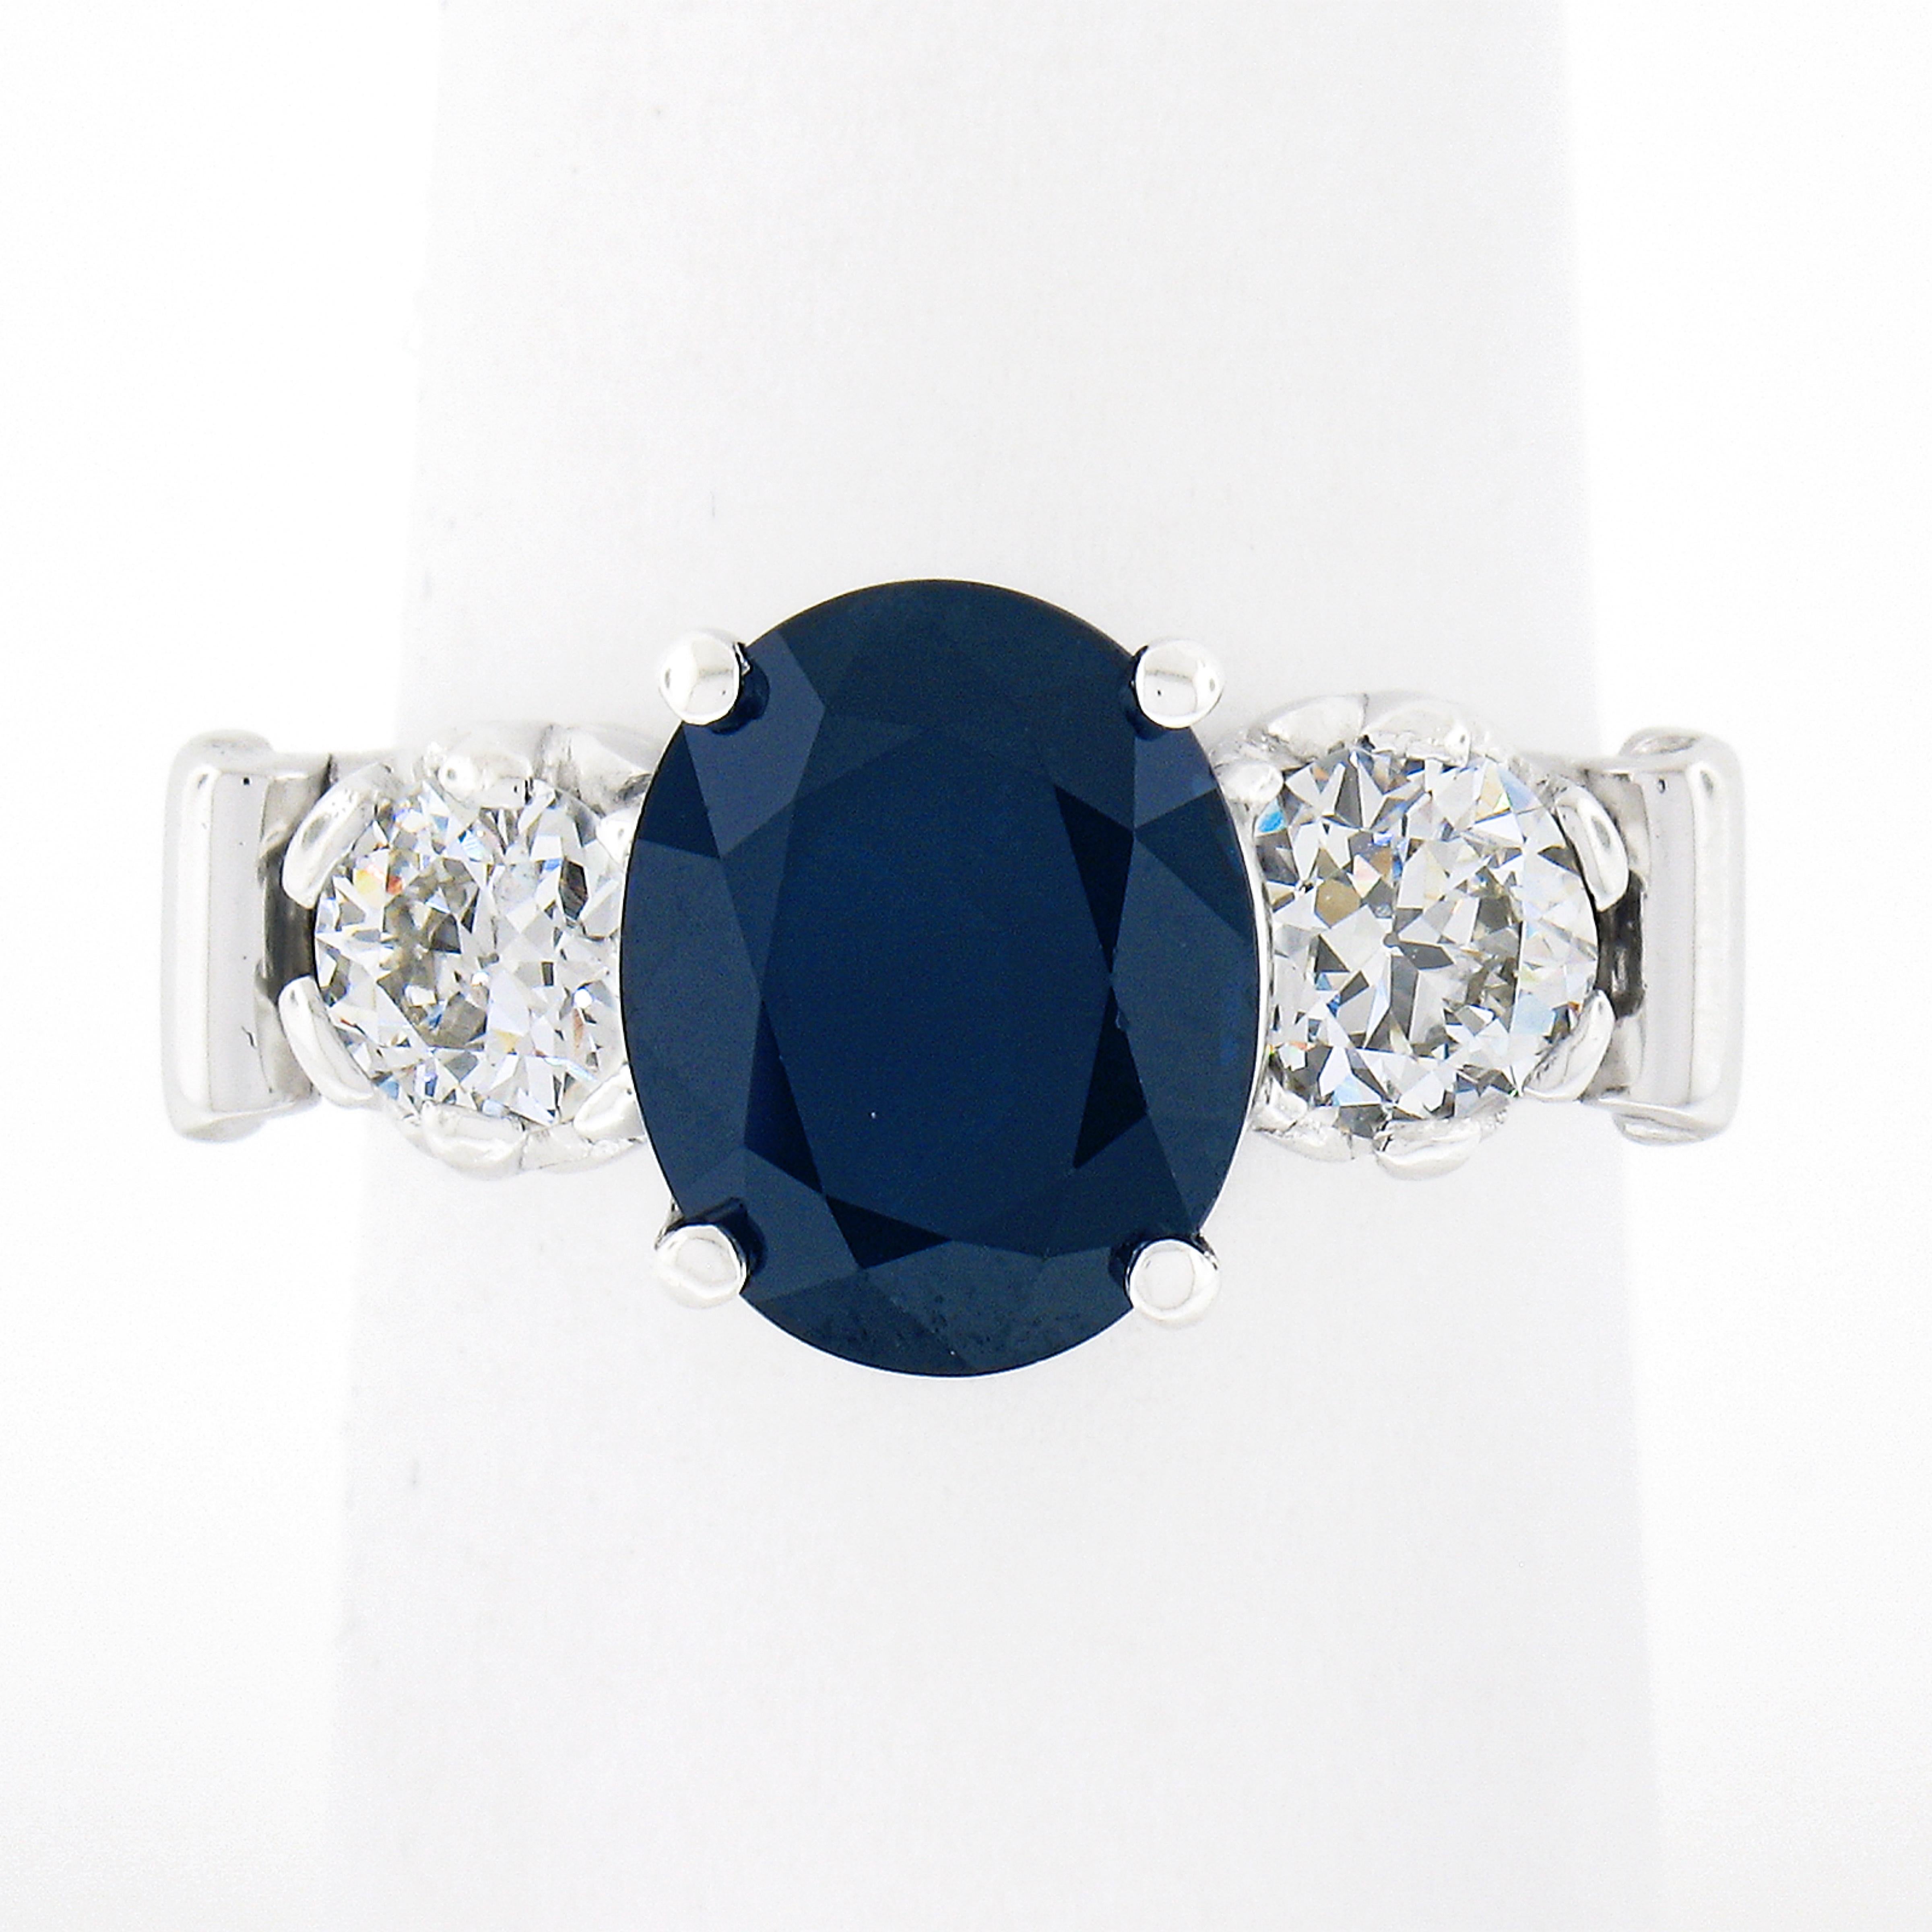 This incredible sapphire and diamond vintage ring is crafted from solid platinum and features a beautiful, GIA certified, sapphire solitaire neatly prong set at the center. The center stone has an oval cut and displays the most gorgeous deep blue